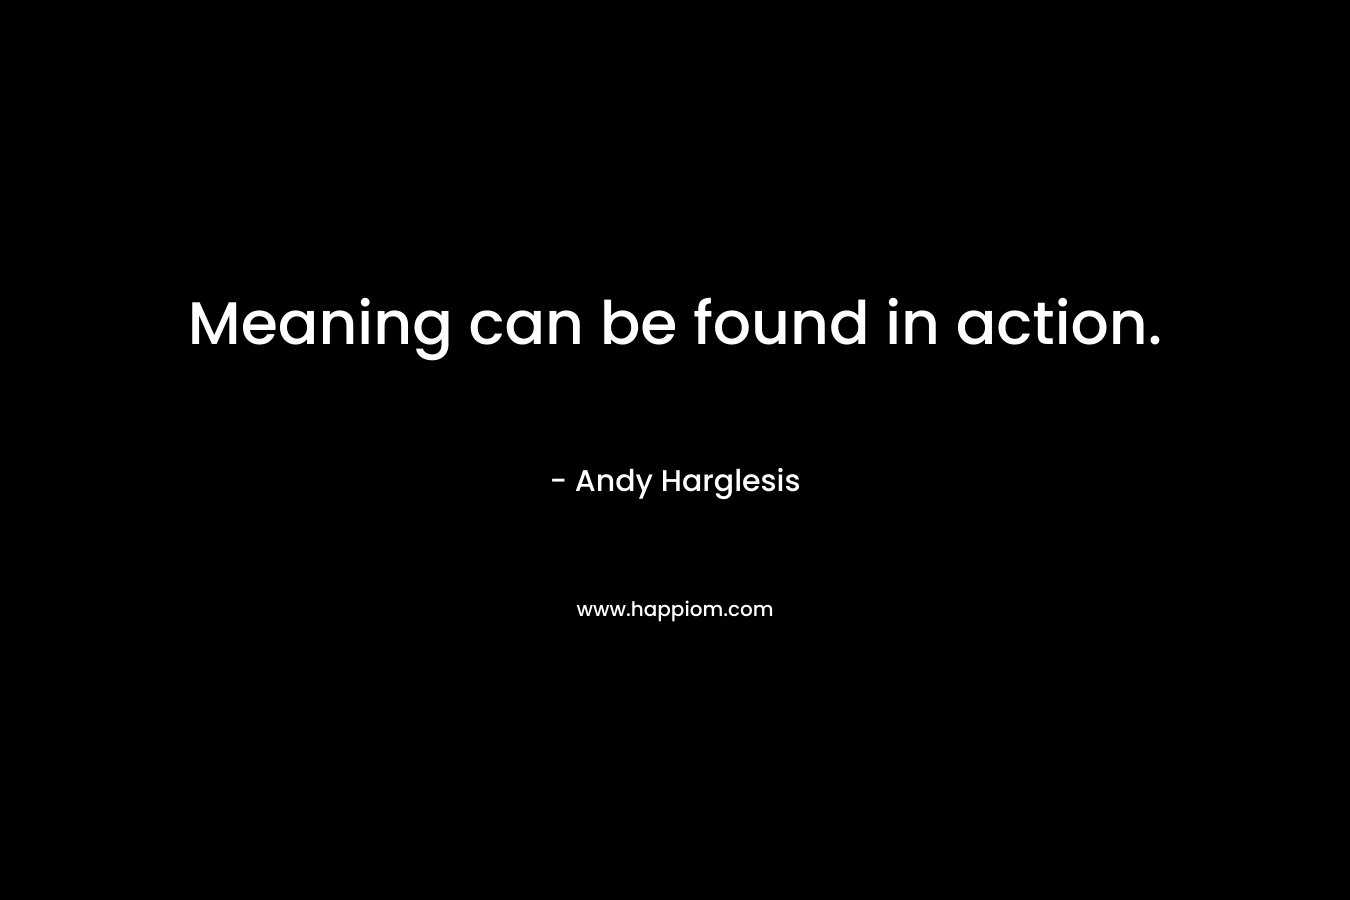 Meaning can be found in action. – Andy Harglesis